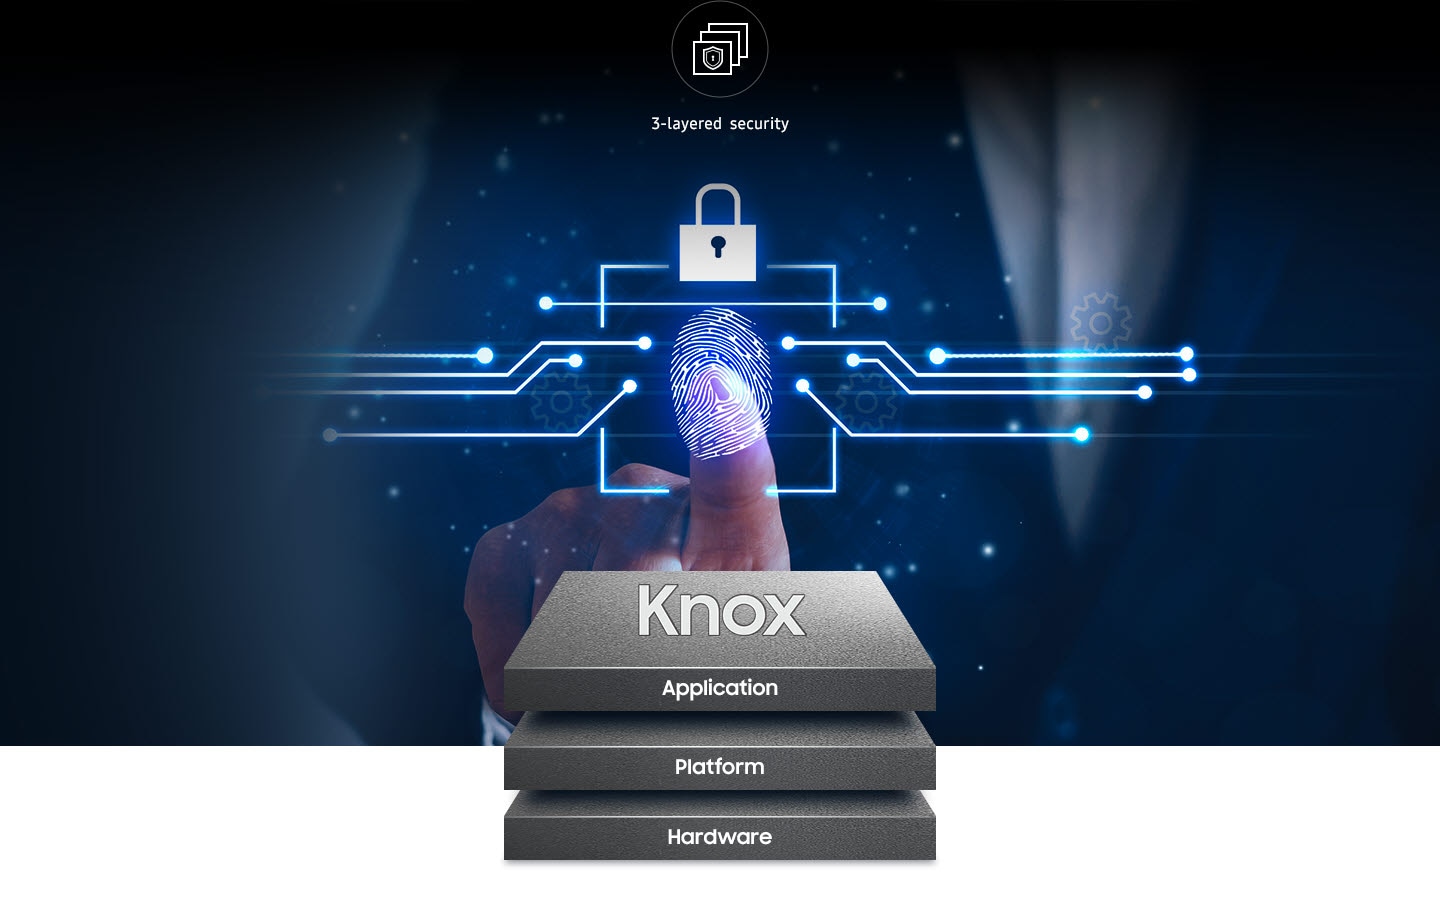 Explanation of Knox�s 3-level security (application, platform, hardware) with a fingerprint sensor shown in the background.